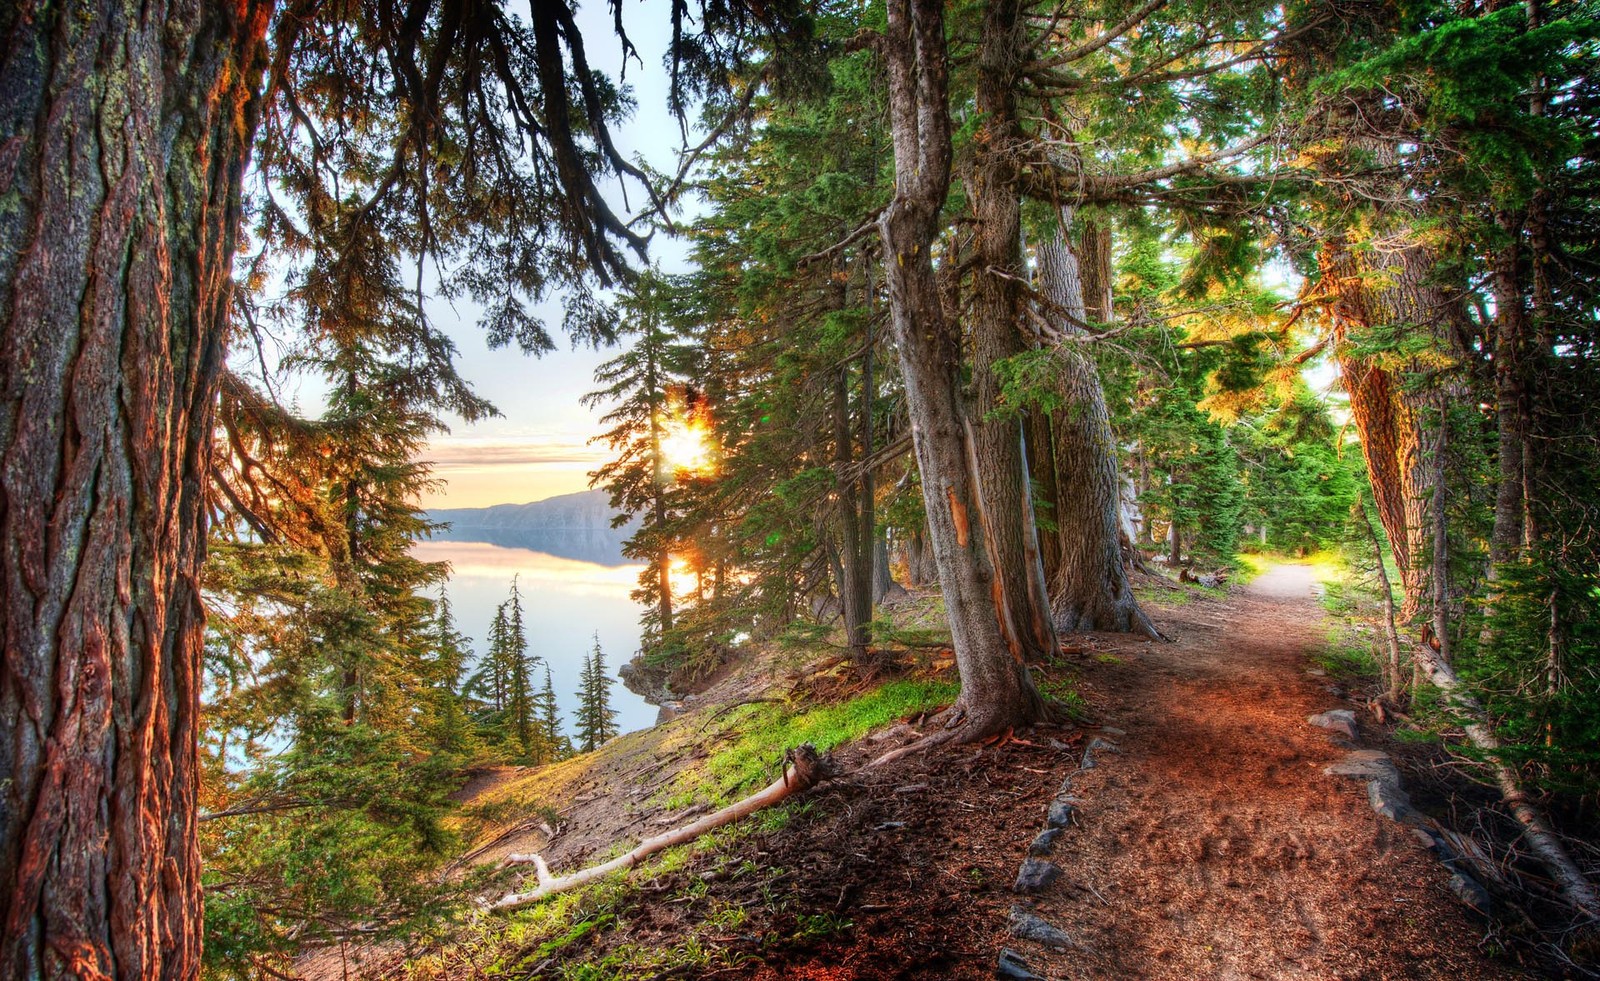 General 1600x981 forest path crater lake trees lake HDR sunset hills nature landscape